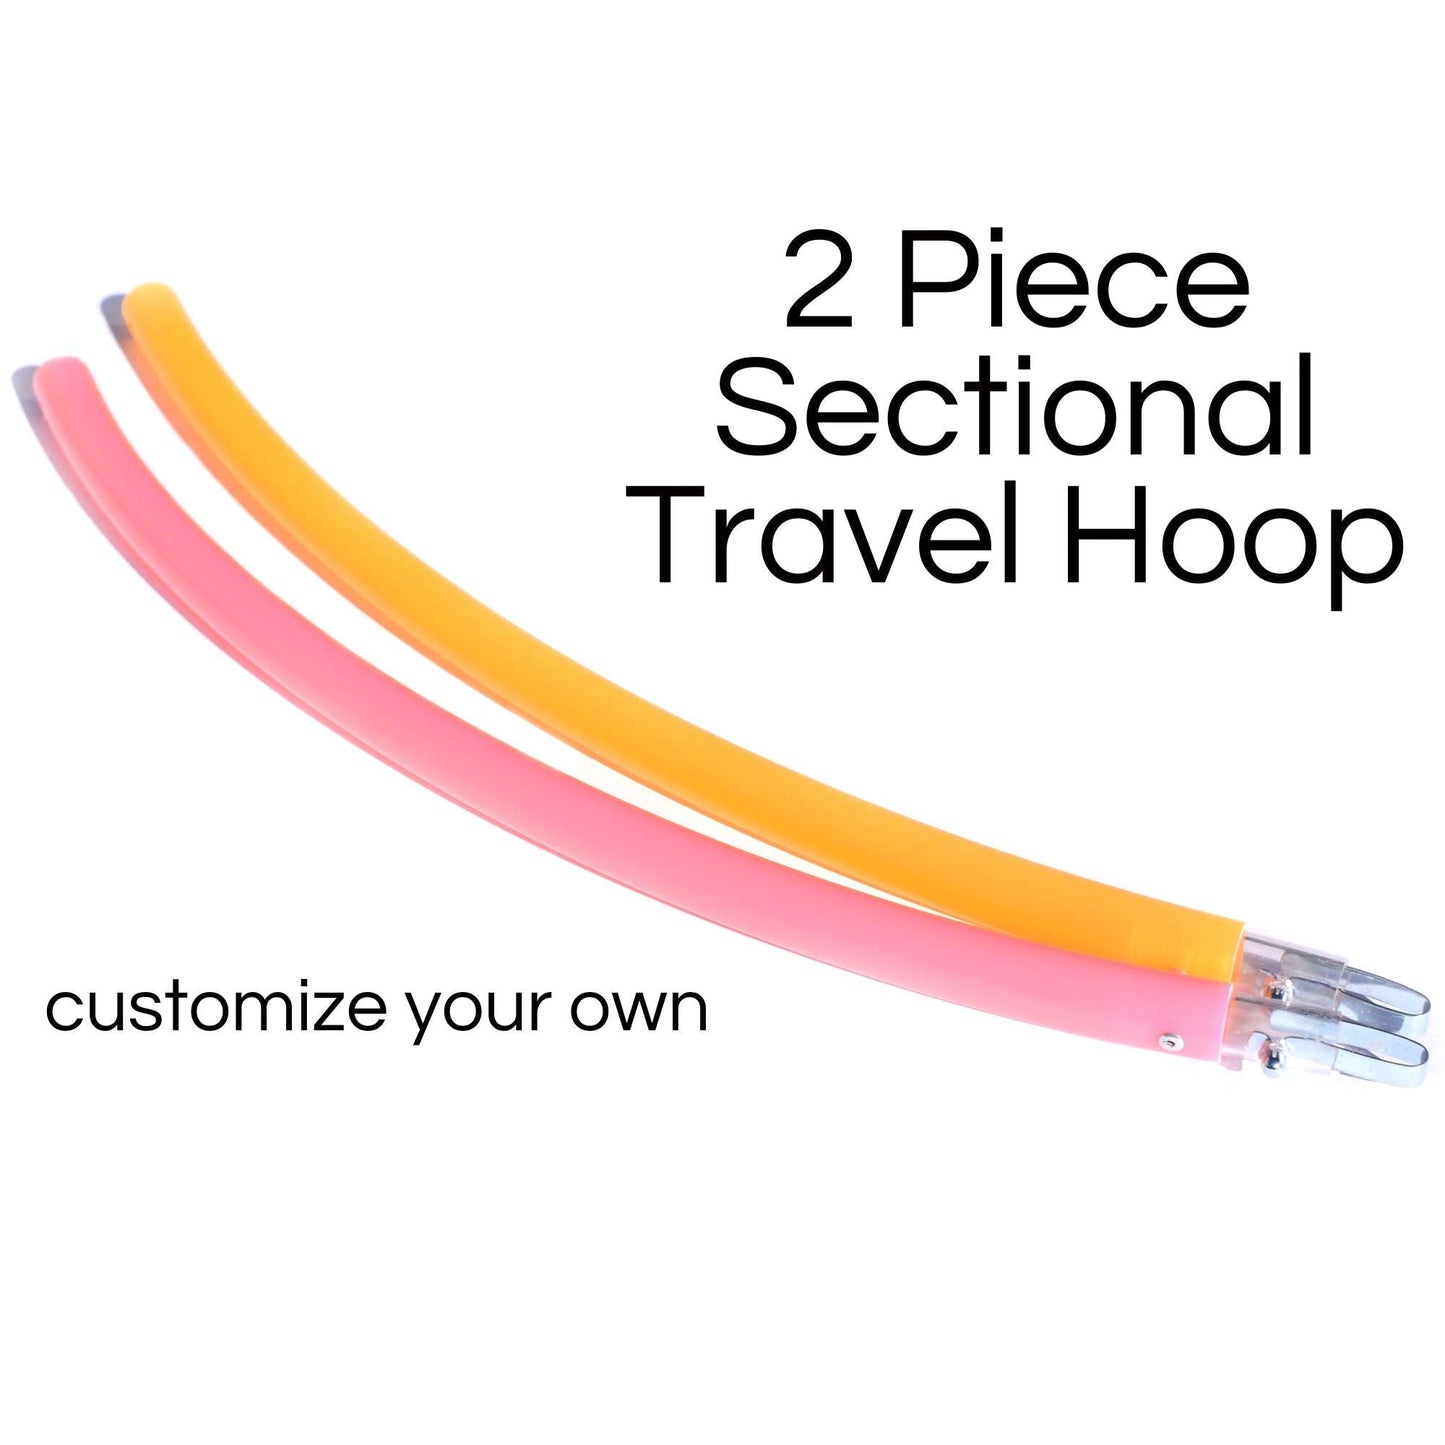 2 Piece Sectional Travel Polypro Hoop